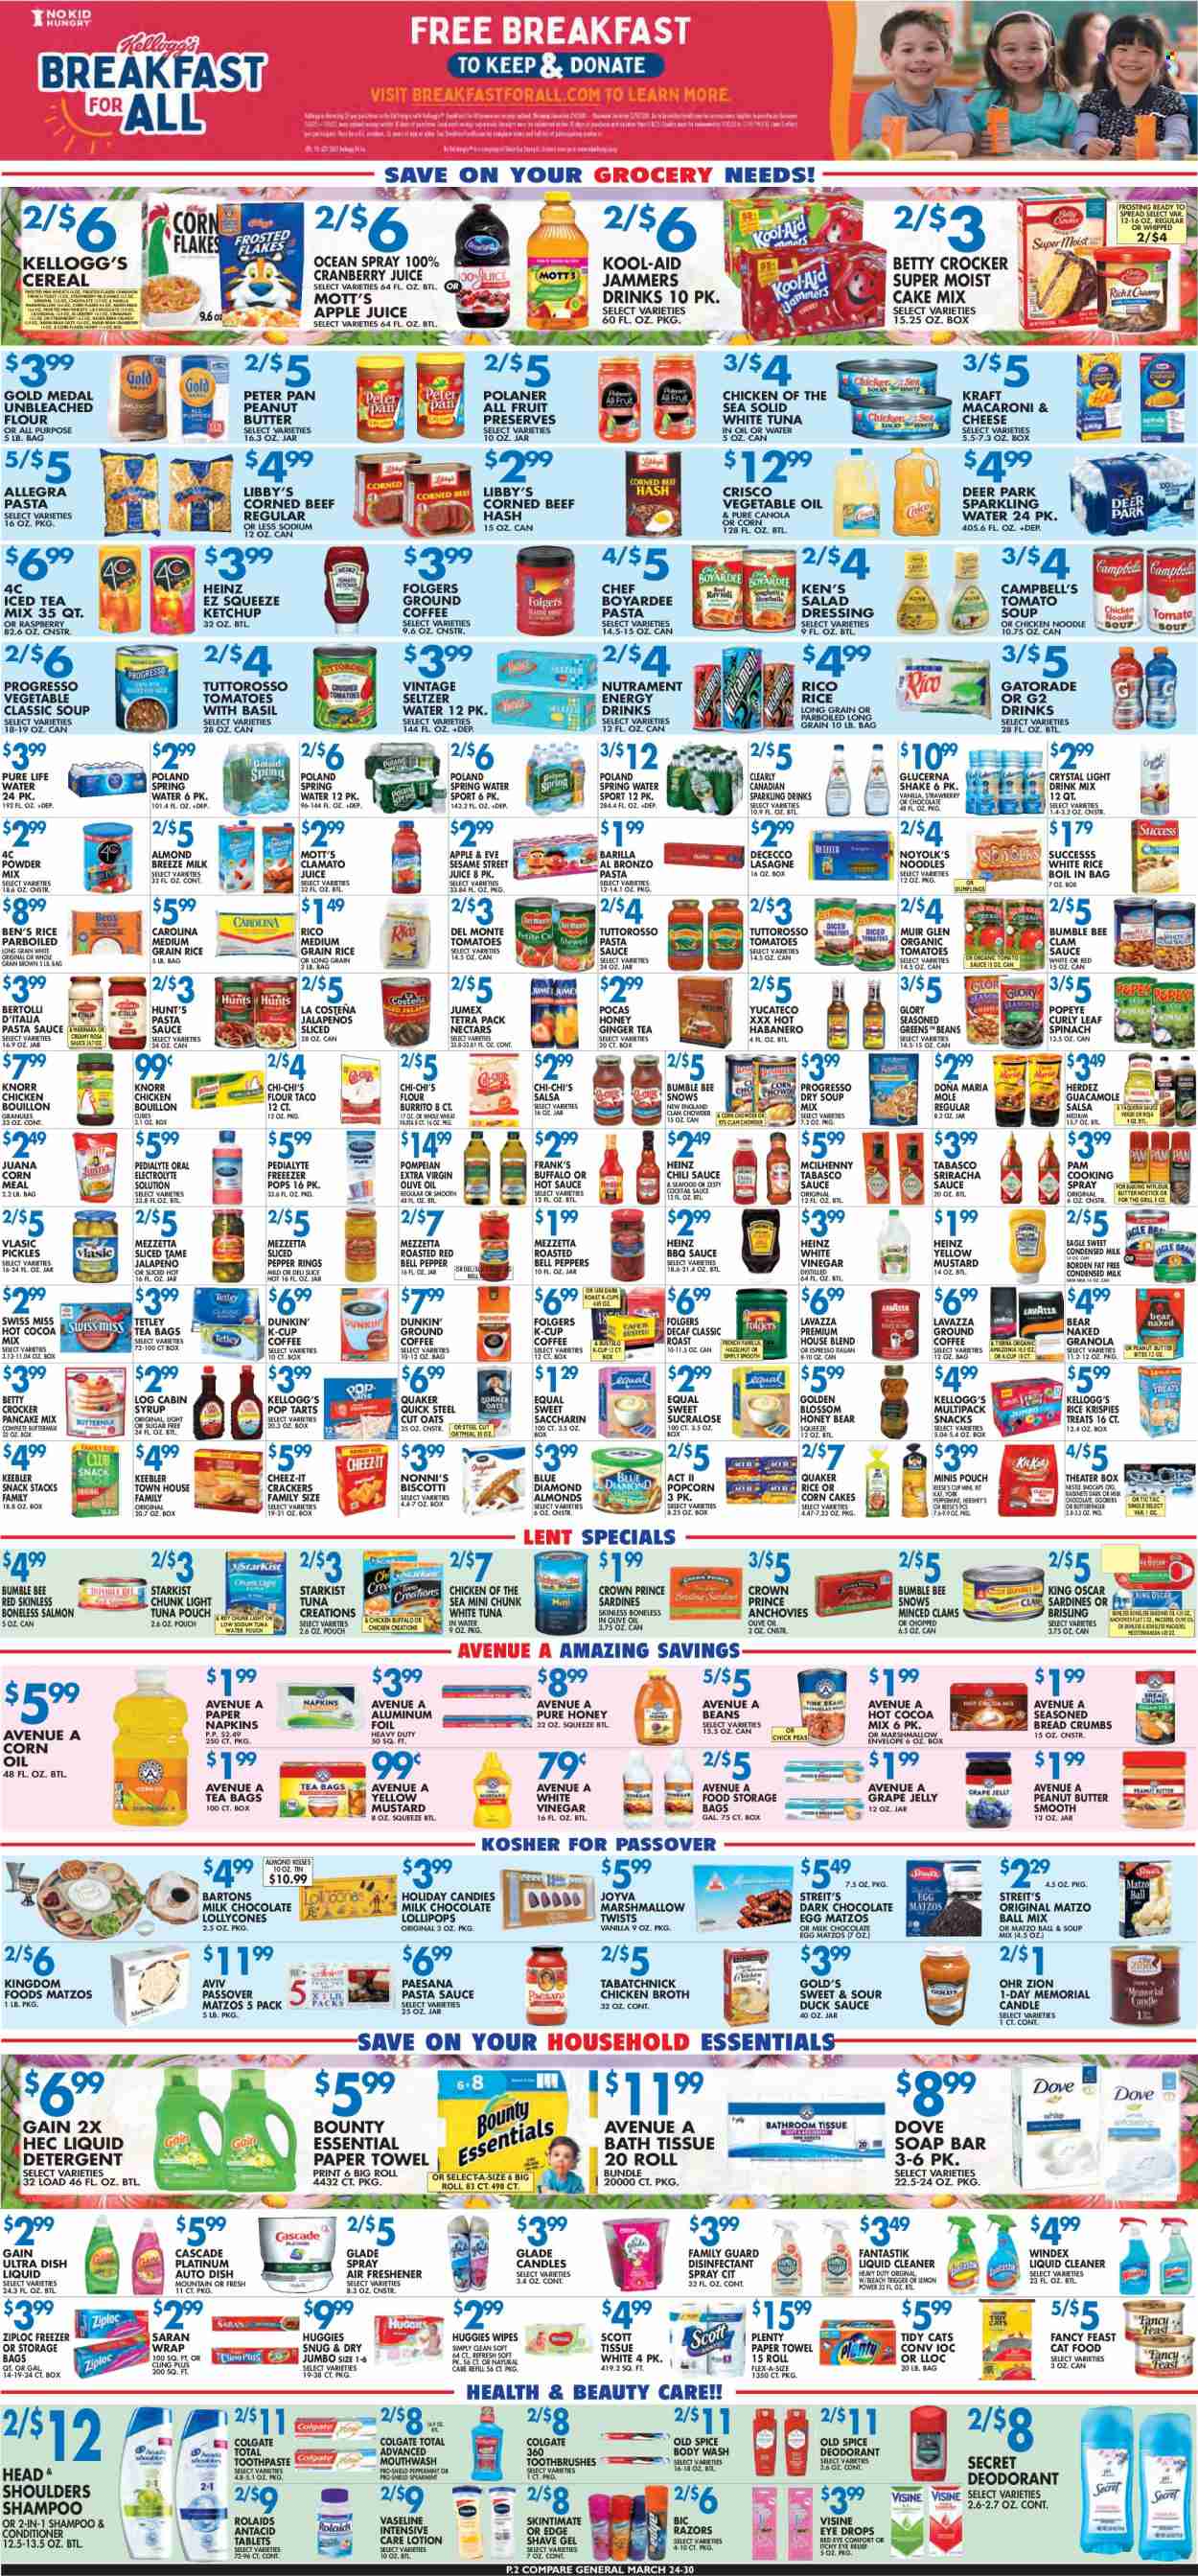 thumbnail - Compare Foods Flyer - 03/24/2023 - 03/30/2023 - Sales products - tart, breadcrumbs, cake mix, bell peppers, peas, peppers, jalapeño, Mott's, mackerel, sardines, StarKist, beef hash, Campbell's, macaroni & cheese, tomato soup, pasta sauce, soup mix, soup, Bumble Bee, Knorr, pancakes, dumplings, Barilla, fajita, burrito, Quaker, noodles, Progresso, Kraft®, Bertolli, roast, guacamole, corned beef, Swiss Miss, buttermilk, milkshake, condensed milk, Almond Breeze, shake, Blossom, Reese's, Hershey's, biscotti, Dove, milk chocolate, Nestlé, snack, Bounty, KitKat, jelly, crackers, lollipop, Kellogg's, dark chocolate, Tic Tac, Pop-Tarts, Keebler, Sesame Street, popcorn, Cheez-It, bouillon, Crisco, frosting, tabasco, chicken broth, oatmeal, oats, broth, anchovies, tomato sauce, Heinz, pickles, light tuna, Chicken of the Sea, clam chowder, Chef Boyardee, Del Monte, cereals, granola, corn flakes, Rice Krispies, Frosted Flakes, Raisin Bran, white rice, medium grain rice, pepper, spice, cinnamon, BBQ sauce, cocktail sauce, duck sauce, mustard, salad dressing, sriracha, hot sauce, ketchup, chilli sauce, dressing, salsa, cooking spray, corn oil, extra virgin olive oil, vegetable oil, vinegar, grape jelly, honey, syrup, Blue Diamond, apple juice, cranberry juice, juice, energy drink, Clamato, Gatorade, Pedialyte, seltzer water, spring water, sparkling water, Pure Life Water, water, hot cocoa, tea bags, coffee, Folgers, ground coffee, coffee capsules, K-Cups, Lavazza, beef meat, Glucerna, eye drops, antibacterial spray, Antacid. Page 2.